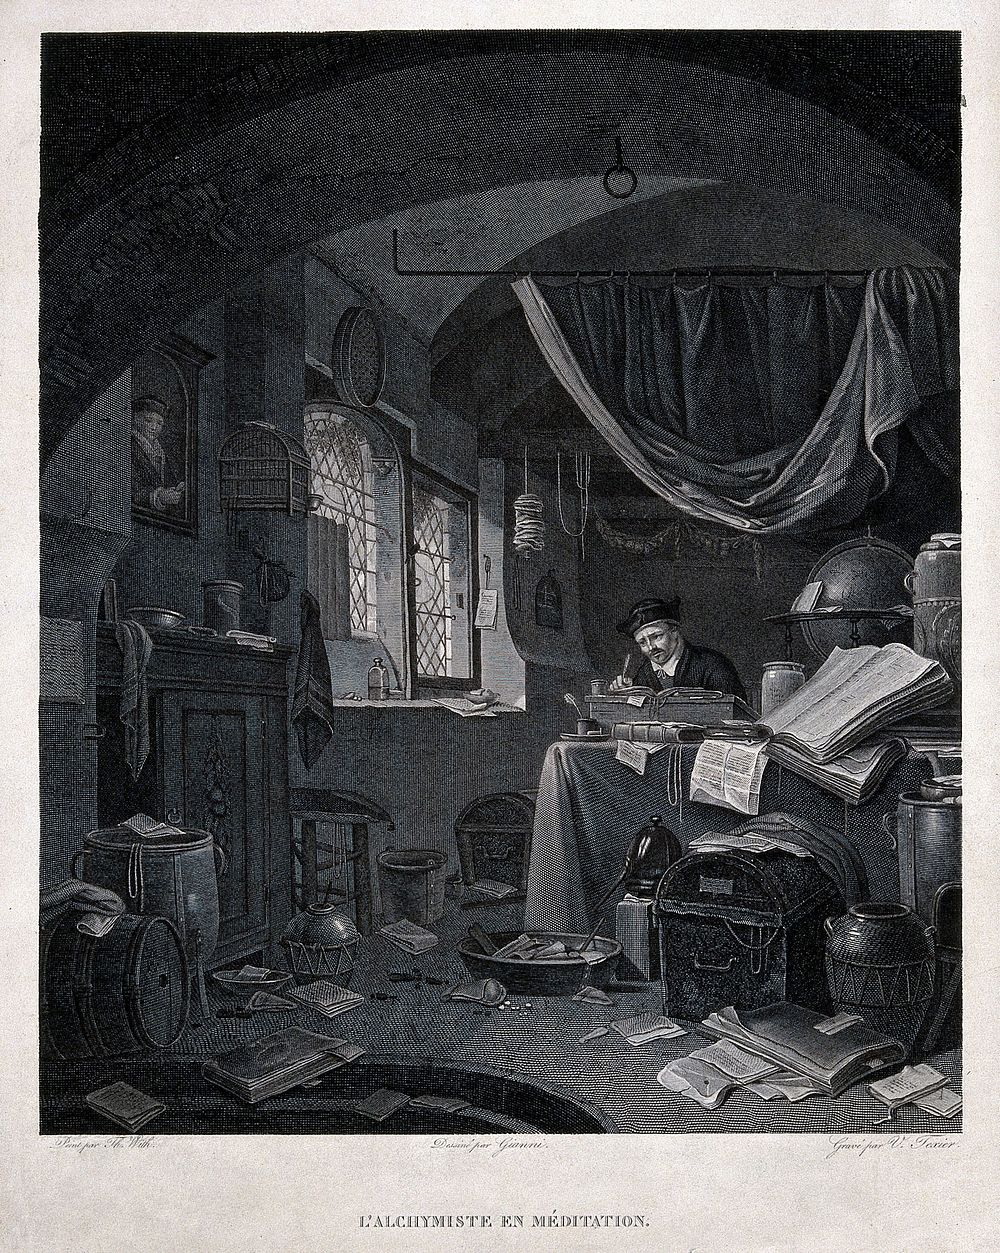 An alchemist peacefully writing in a room strewn with papers. Engraving by V.A.L. Texier after F. Giani after T. Wyck.